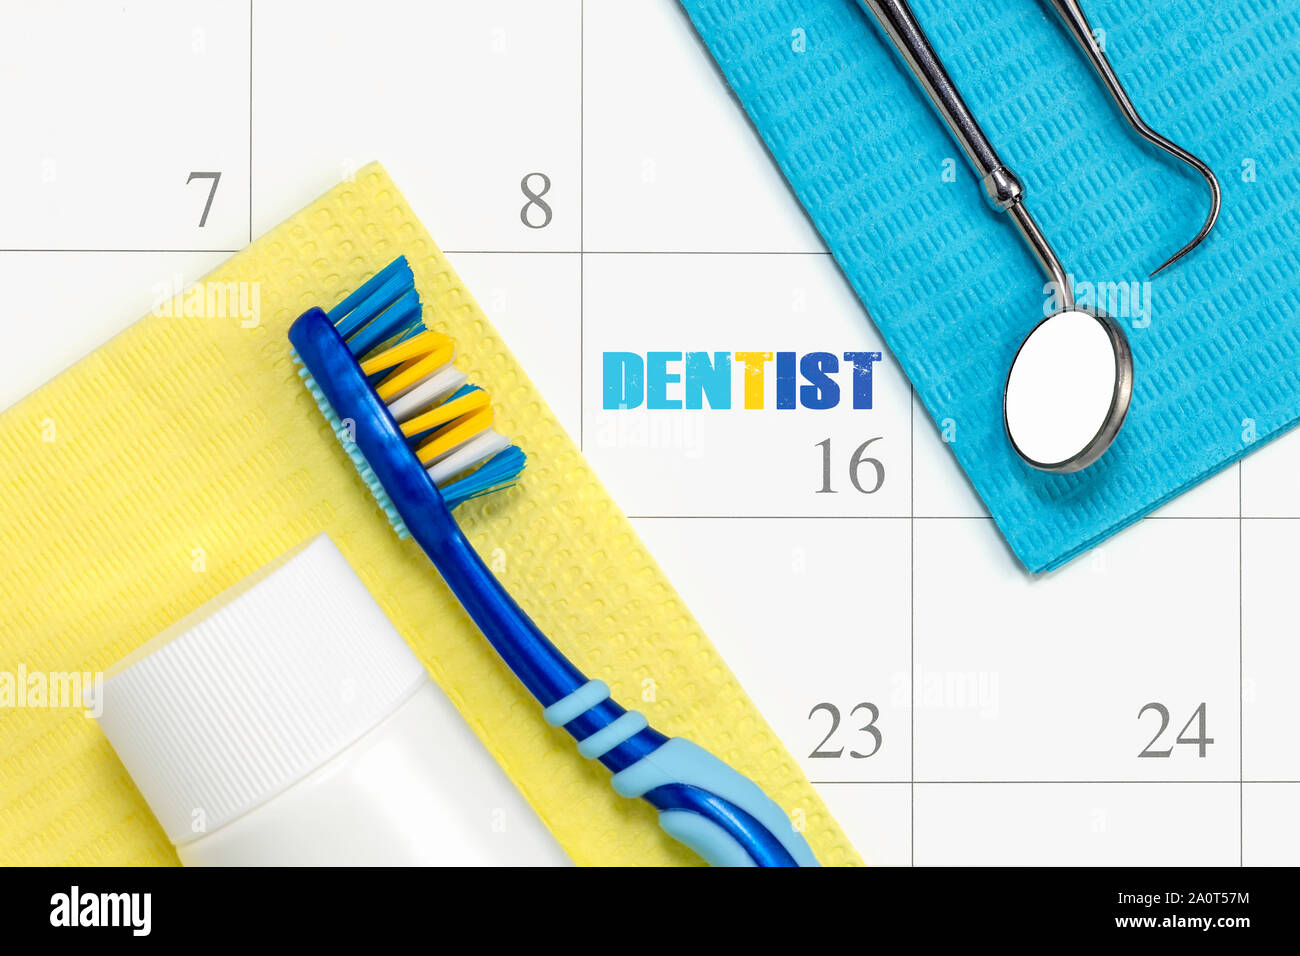 Dentist appointment and dental check up health care concept reminder in month calendar with toothbrush dental tools and toothpaste. Stock Photo